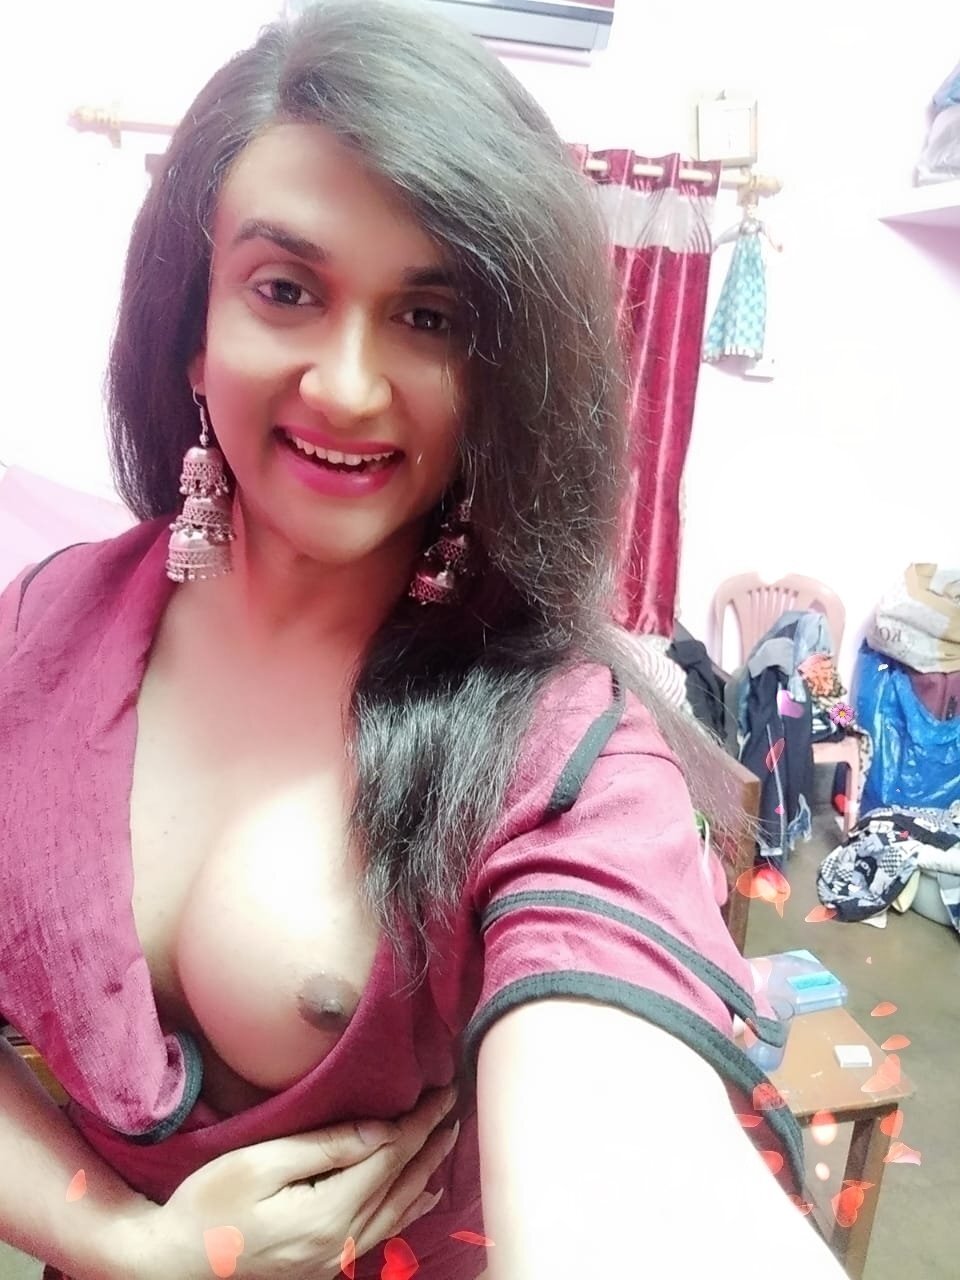 Indian Transsexuals Nude - Desi Indian shemale 4 - Porn Videos & Photos - EroMe